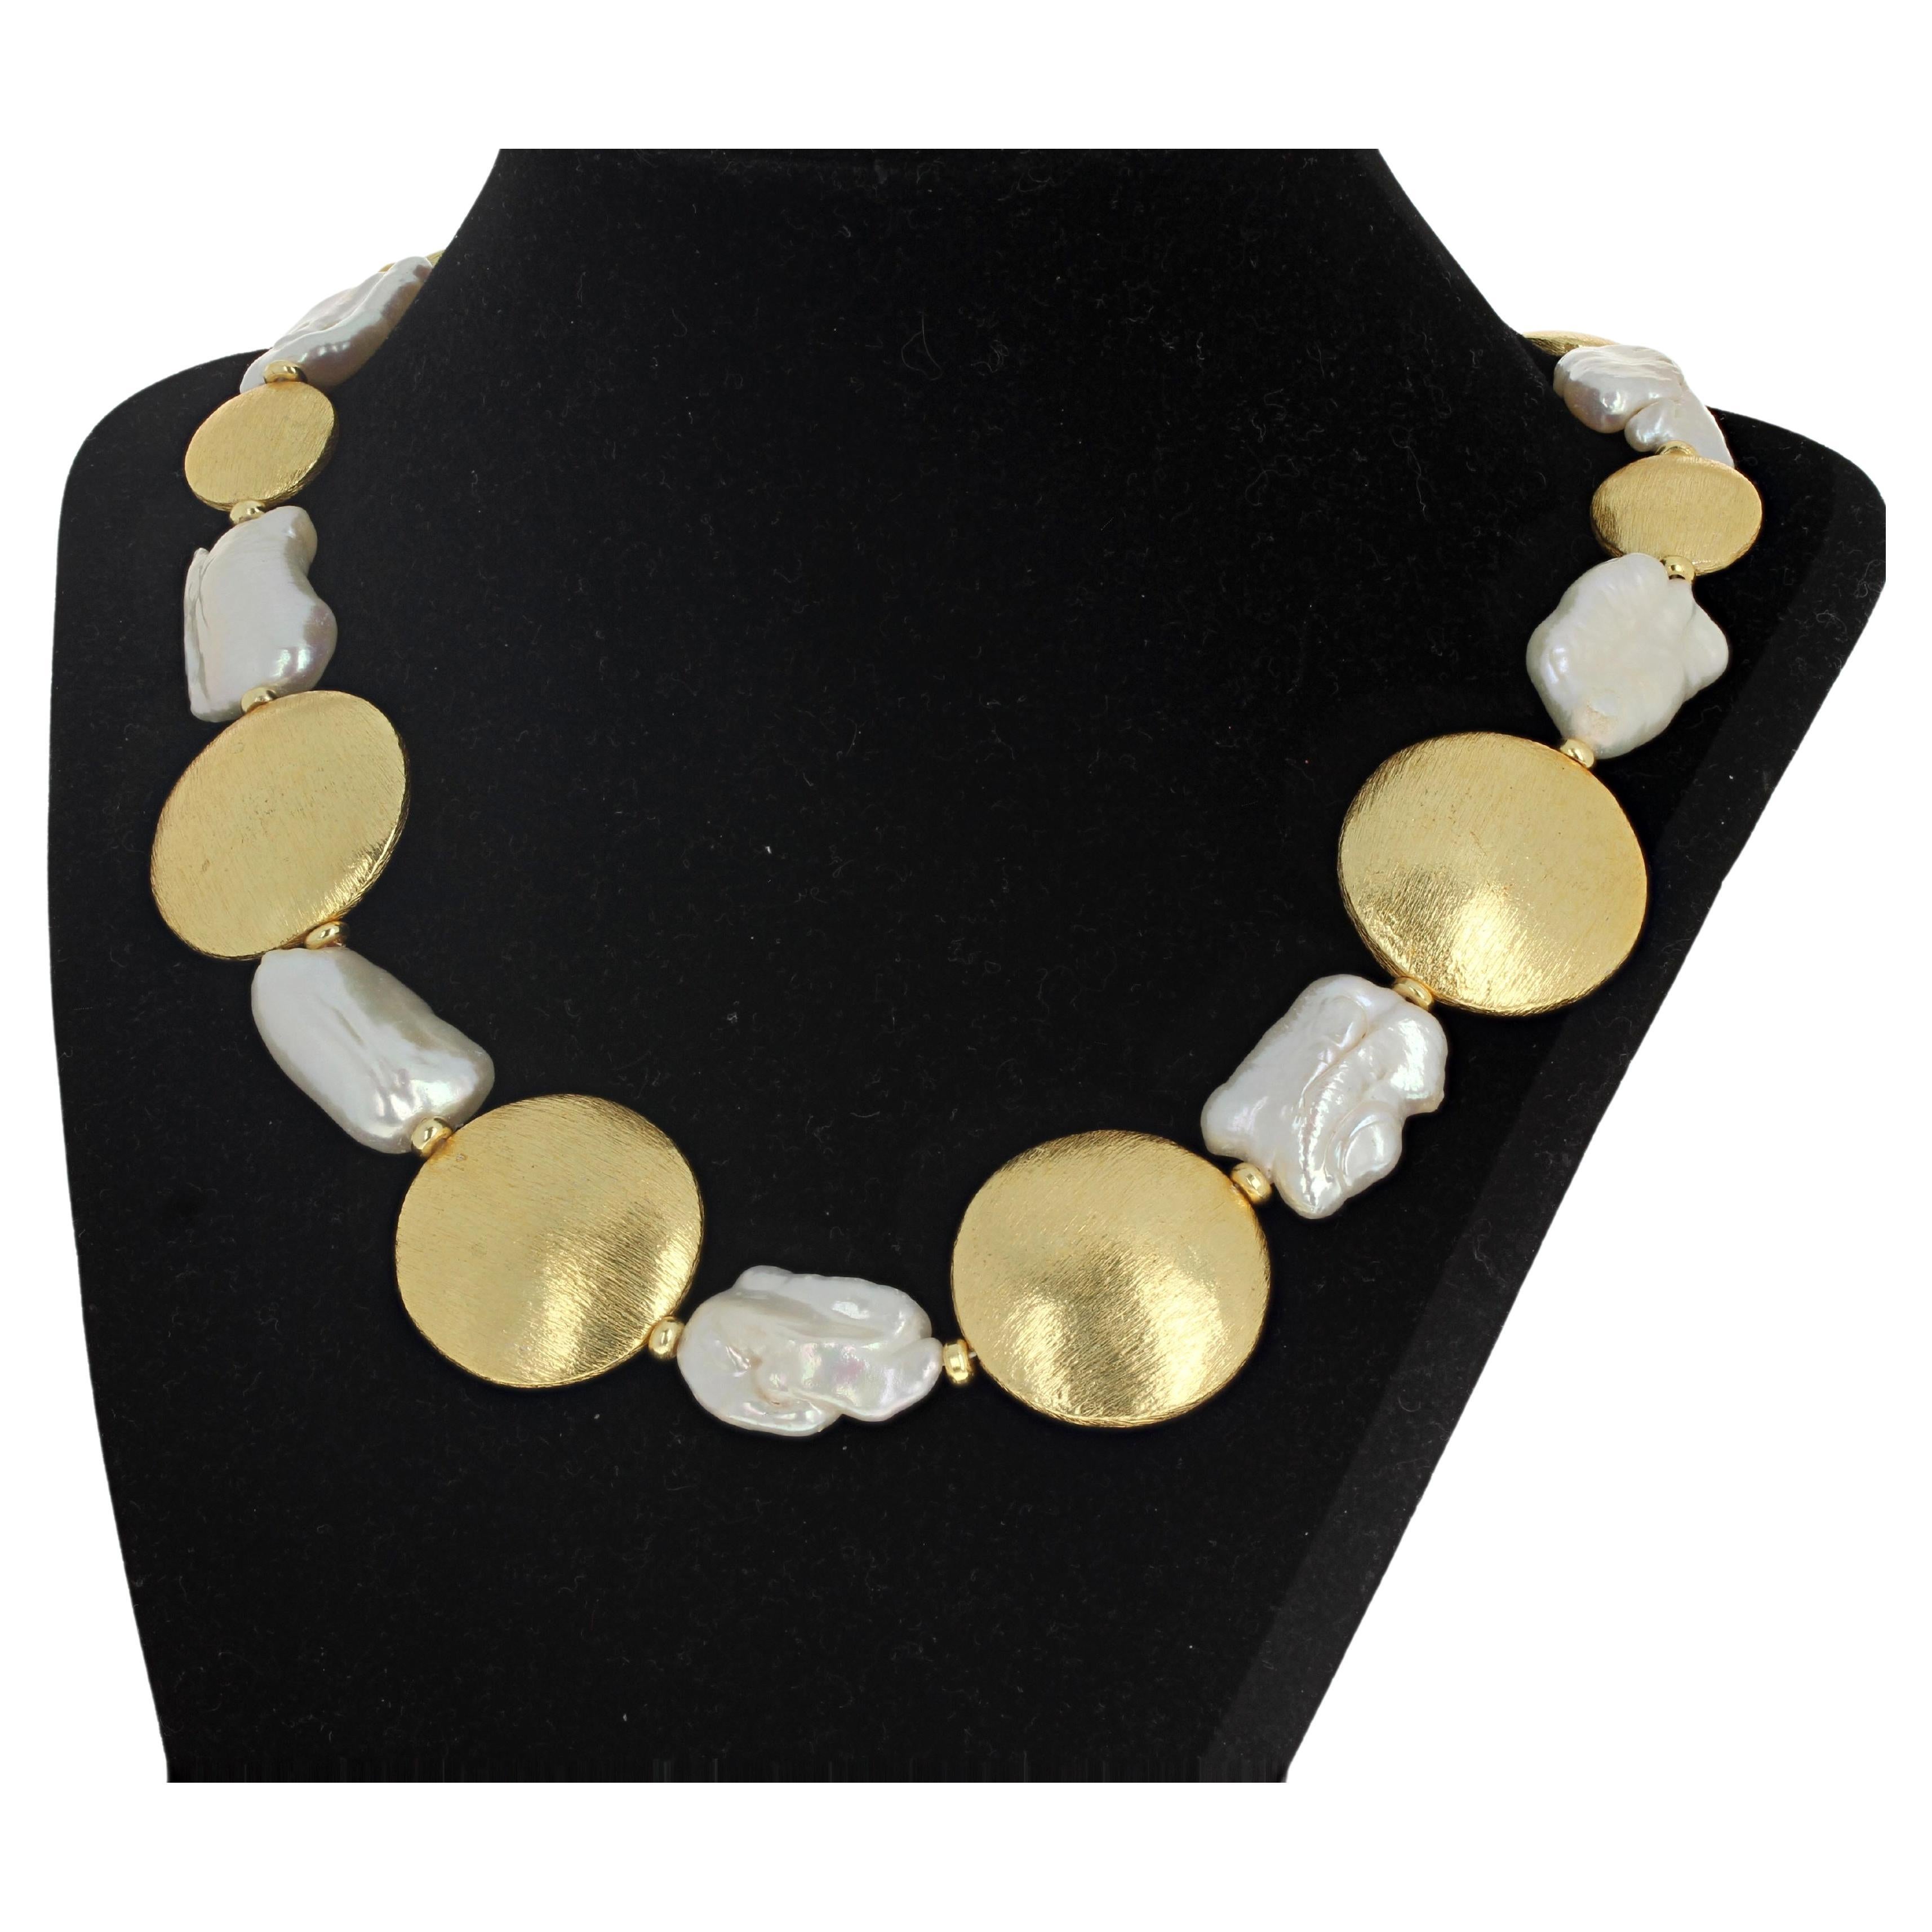 AJD Real Very White Natural Pearls & Goldy Rondels Very Elegant 18 1/2" Necklace For Sale